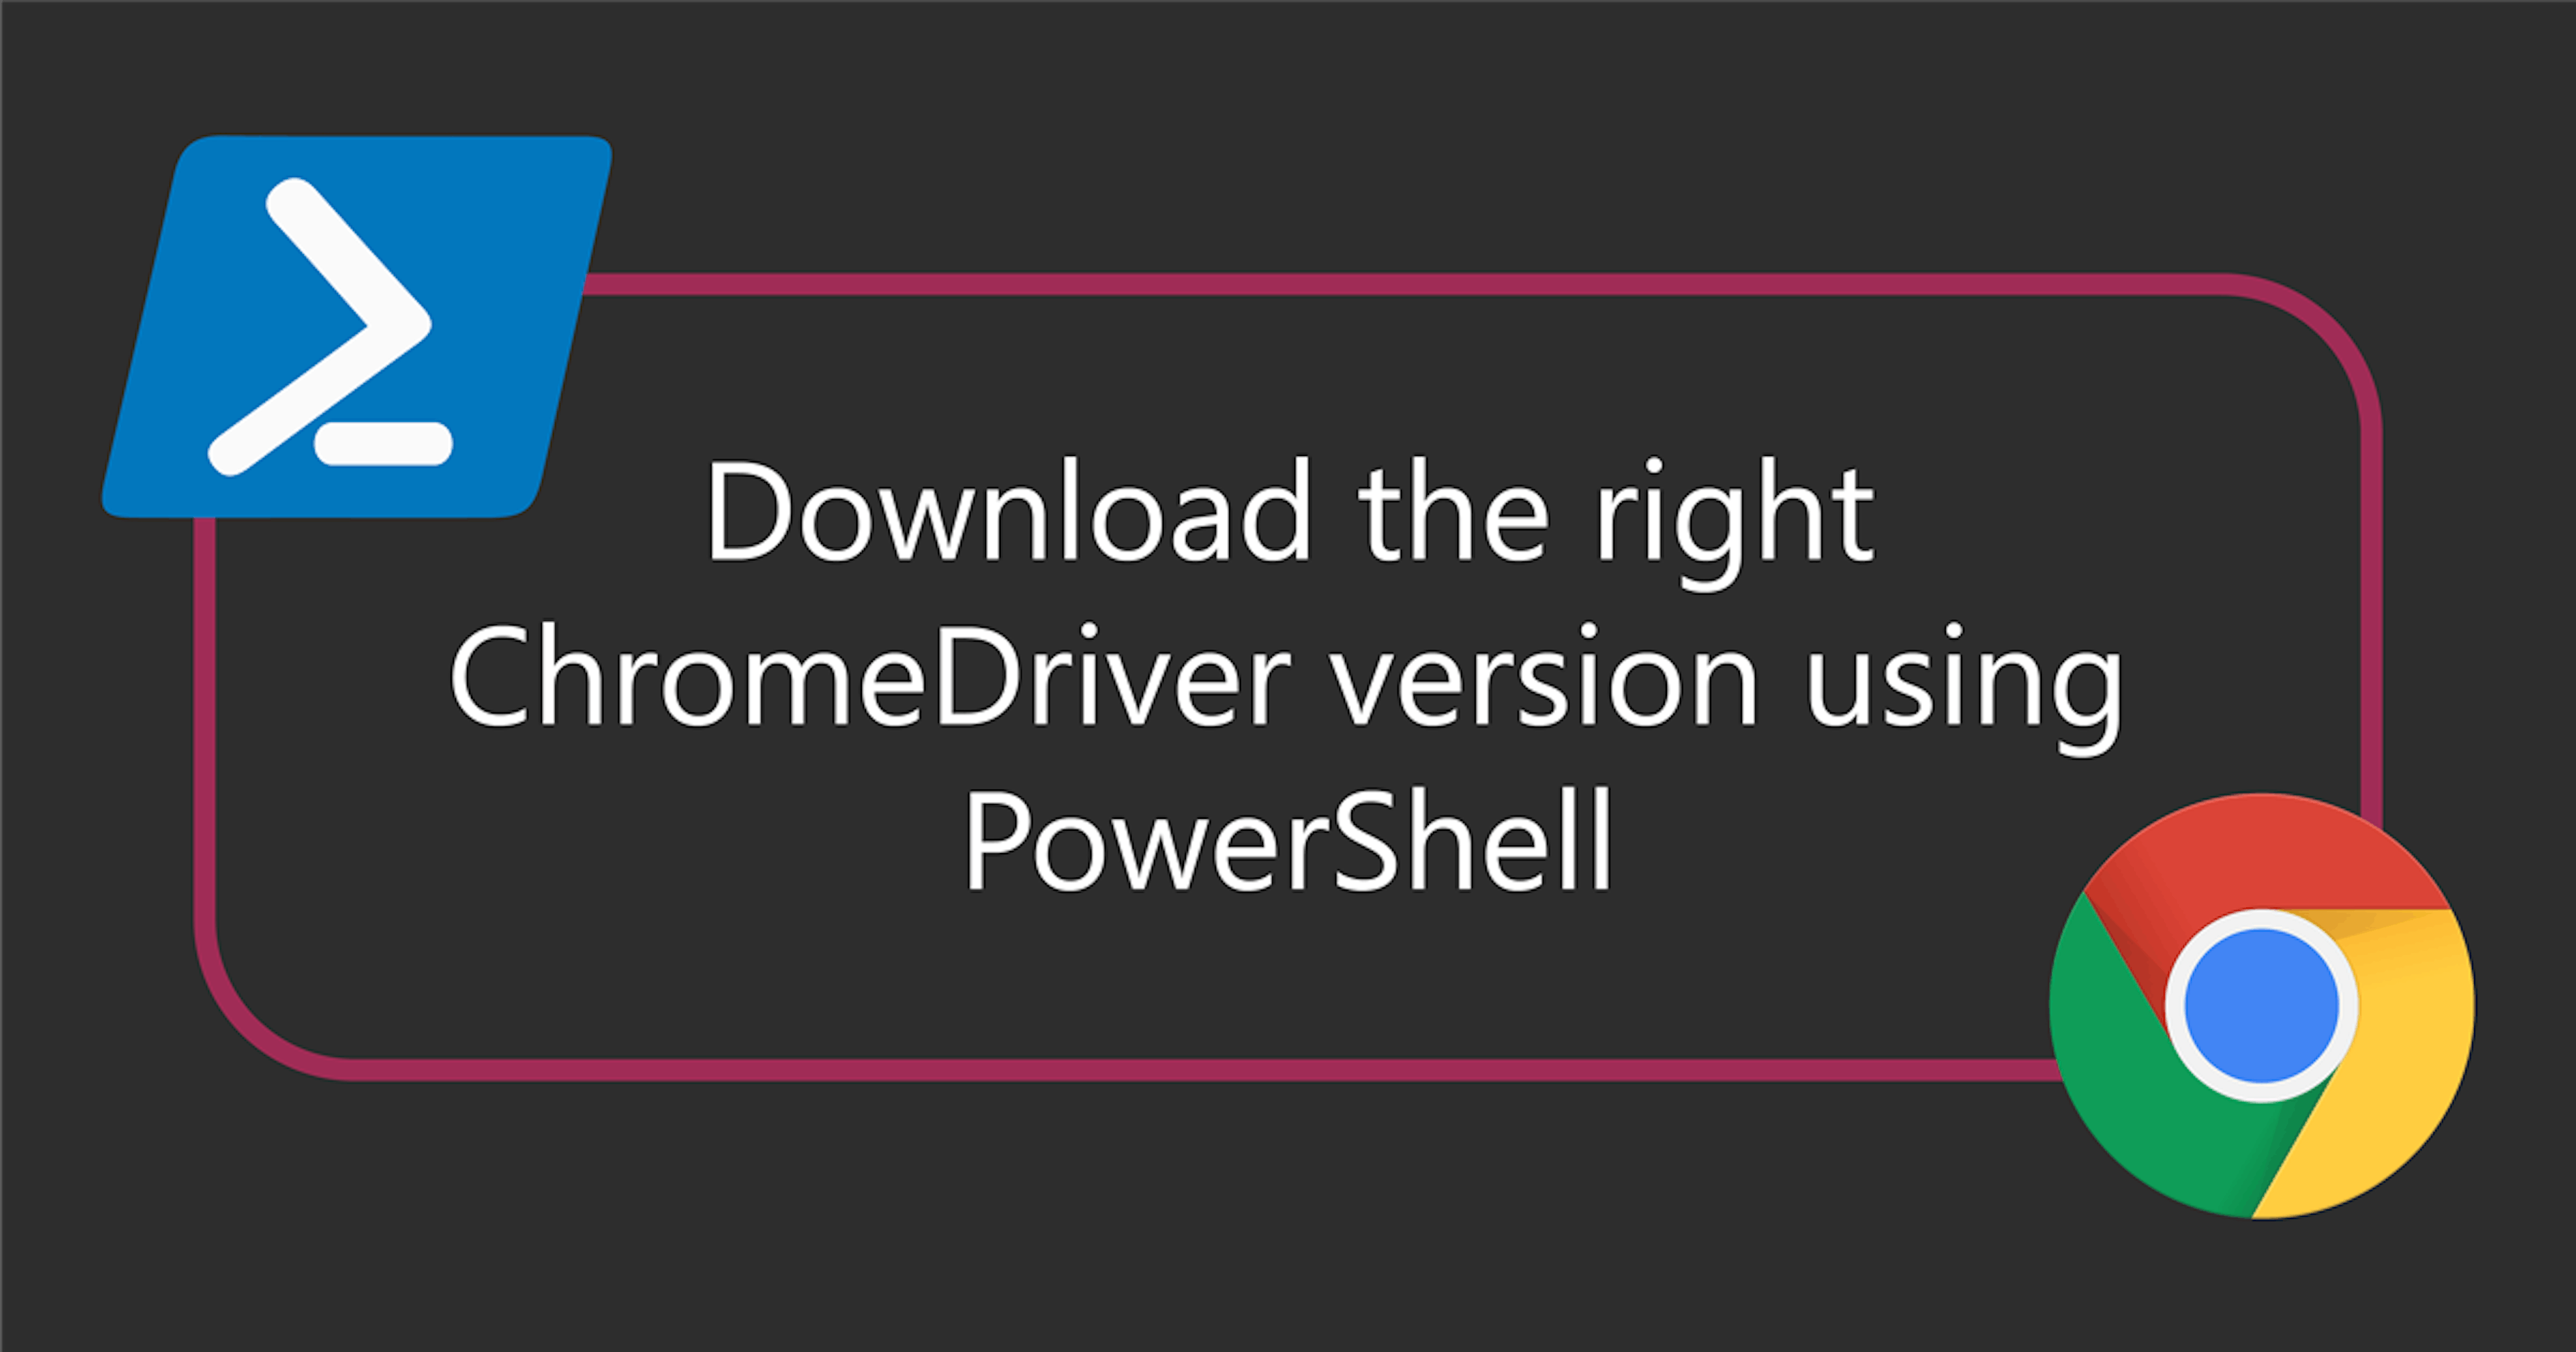 featured image - How to Build a PowerShell Script to Keep ChromeDriver Up to Date